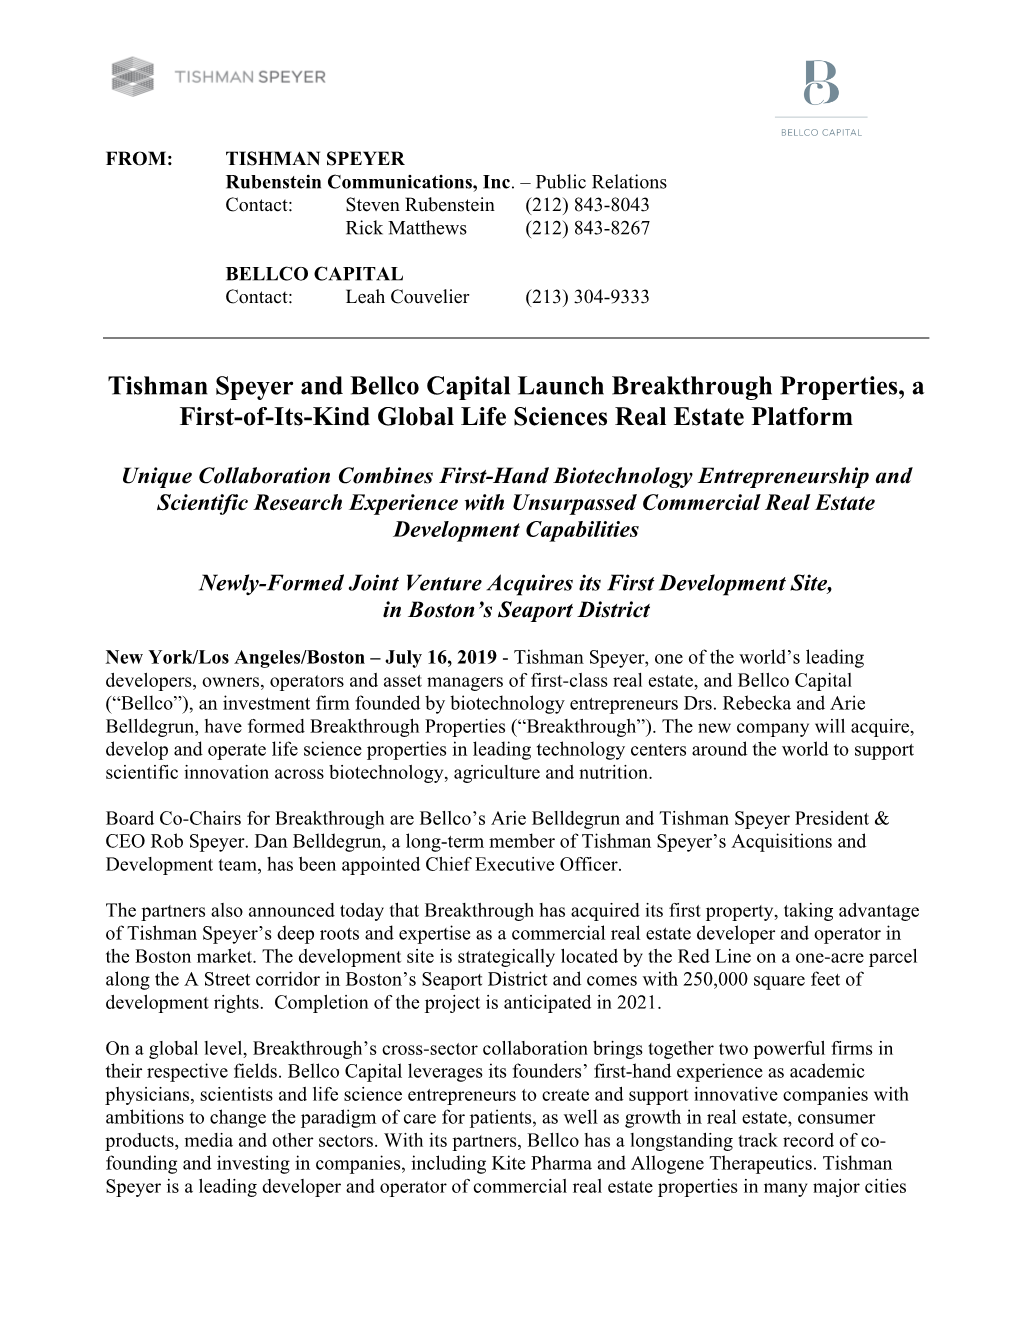 Tishman Speyer and Bellco Capital Launch Breakthrough Properties, a First-Of-Its-Kind Global Life Sciences Real Estate Platform